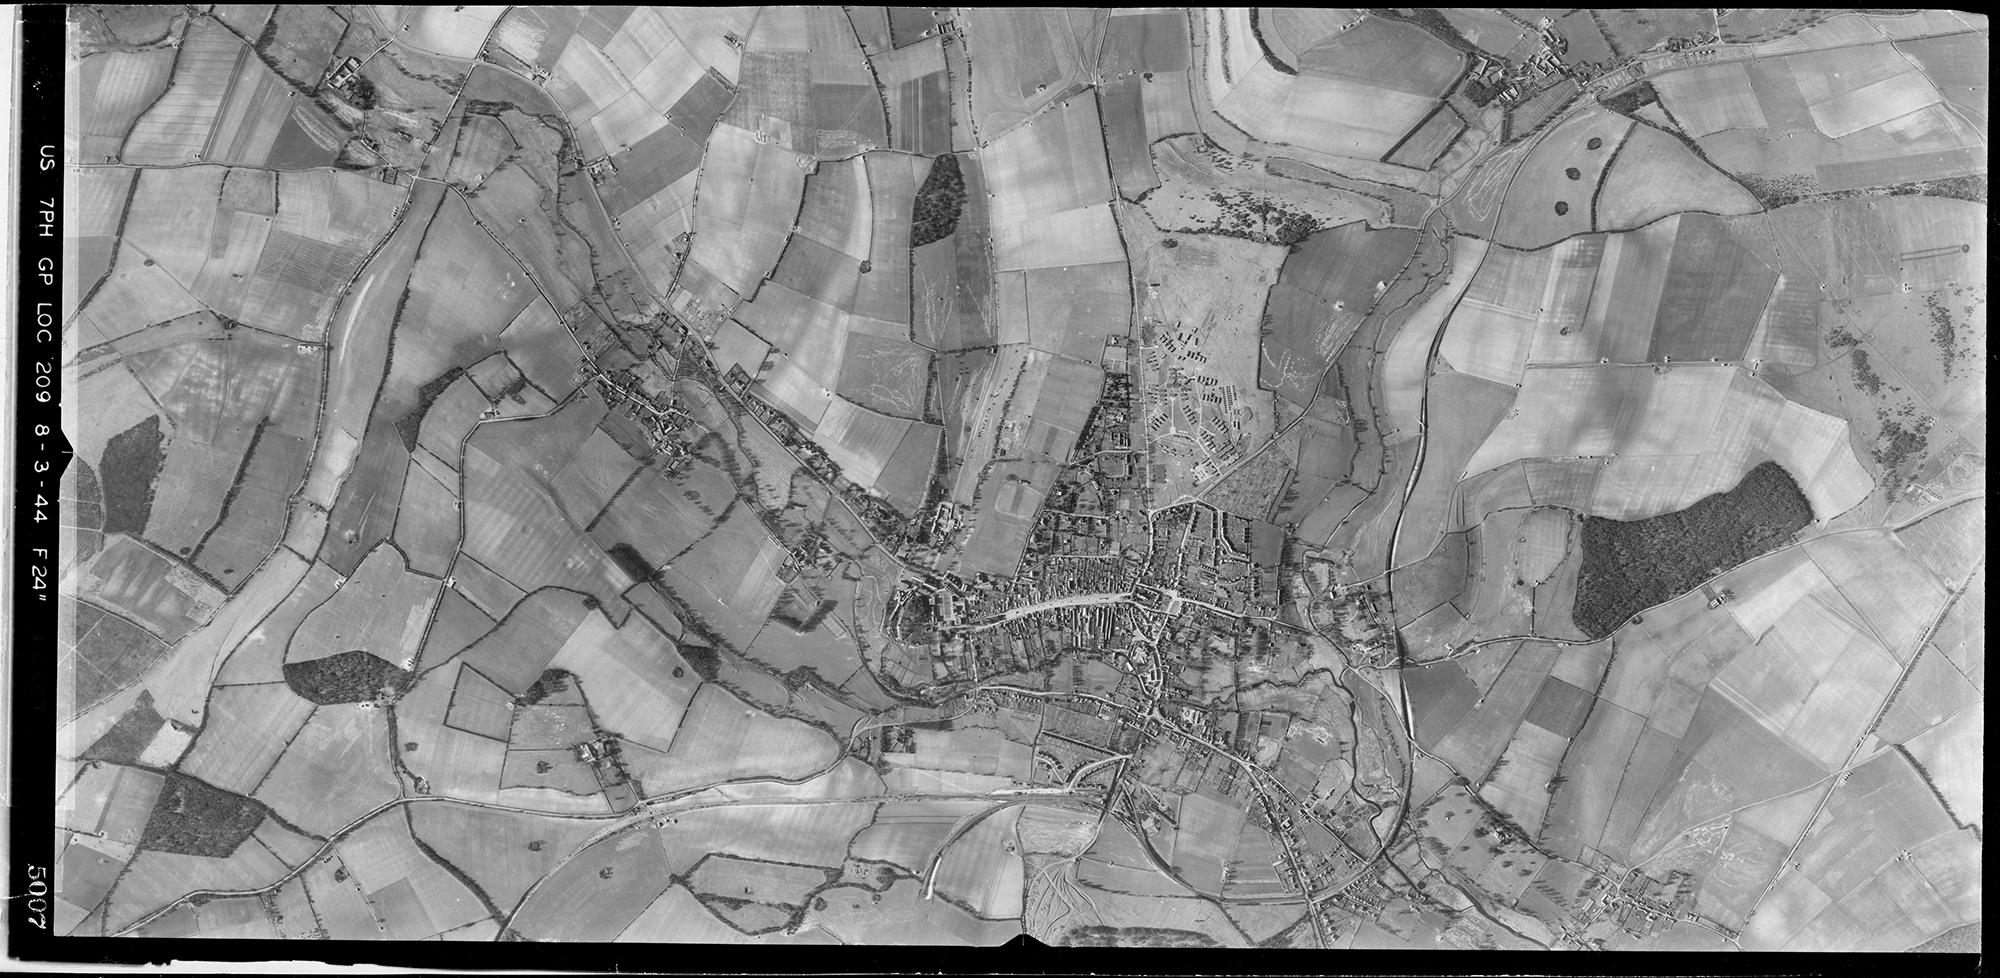 A black and white vertical aerial photograph of an urban area set in a landscape of fields and valleys. The settlement includes a wide central street with plots stretching back from it. Patches of woodland are dotted amongst the patchwork of fields.